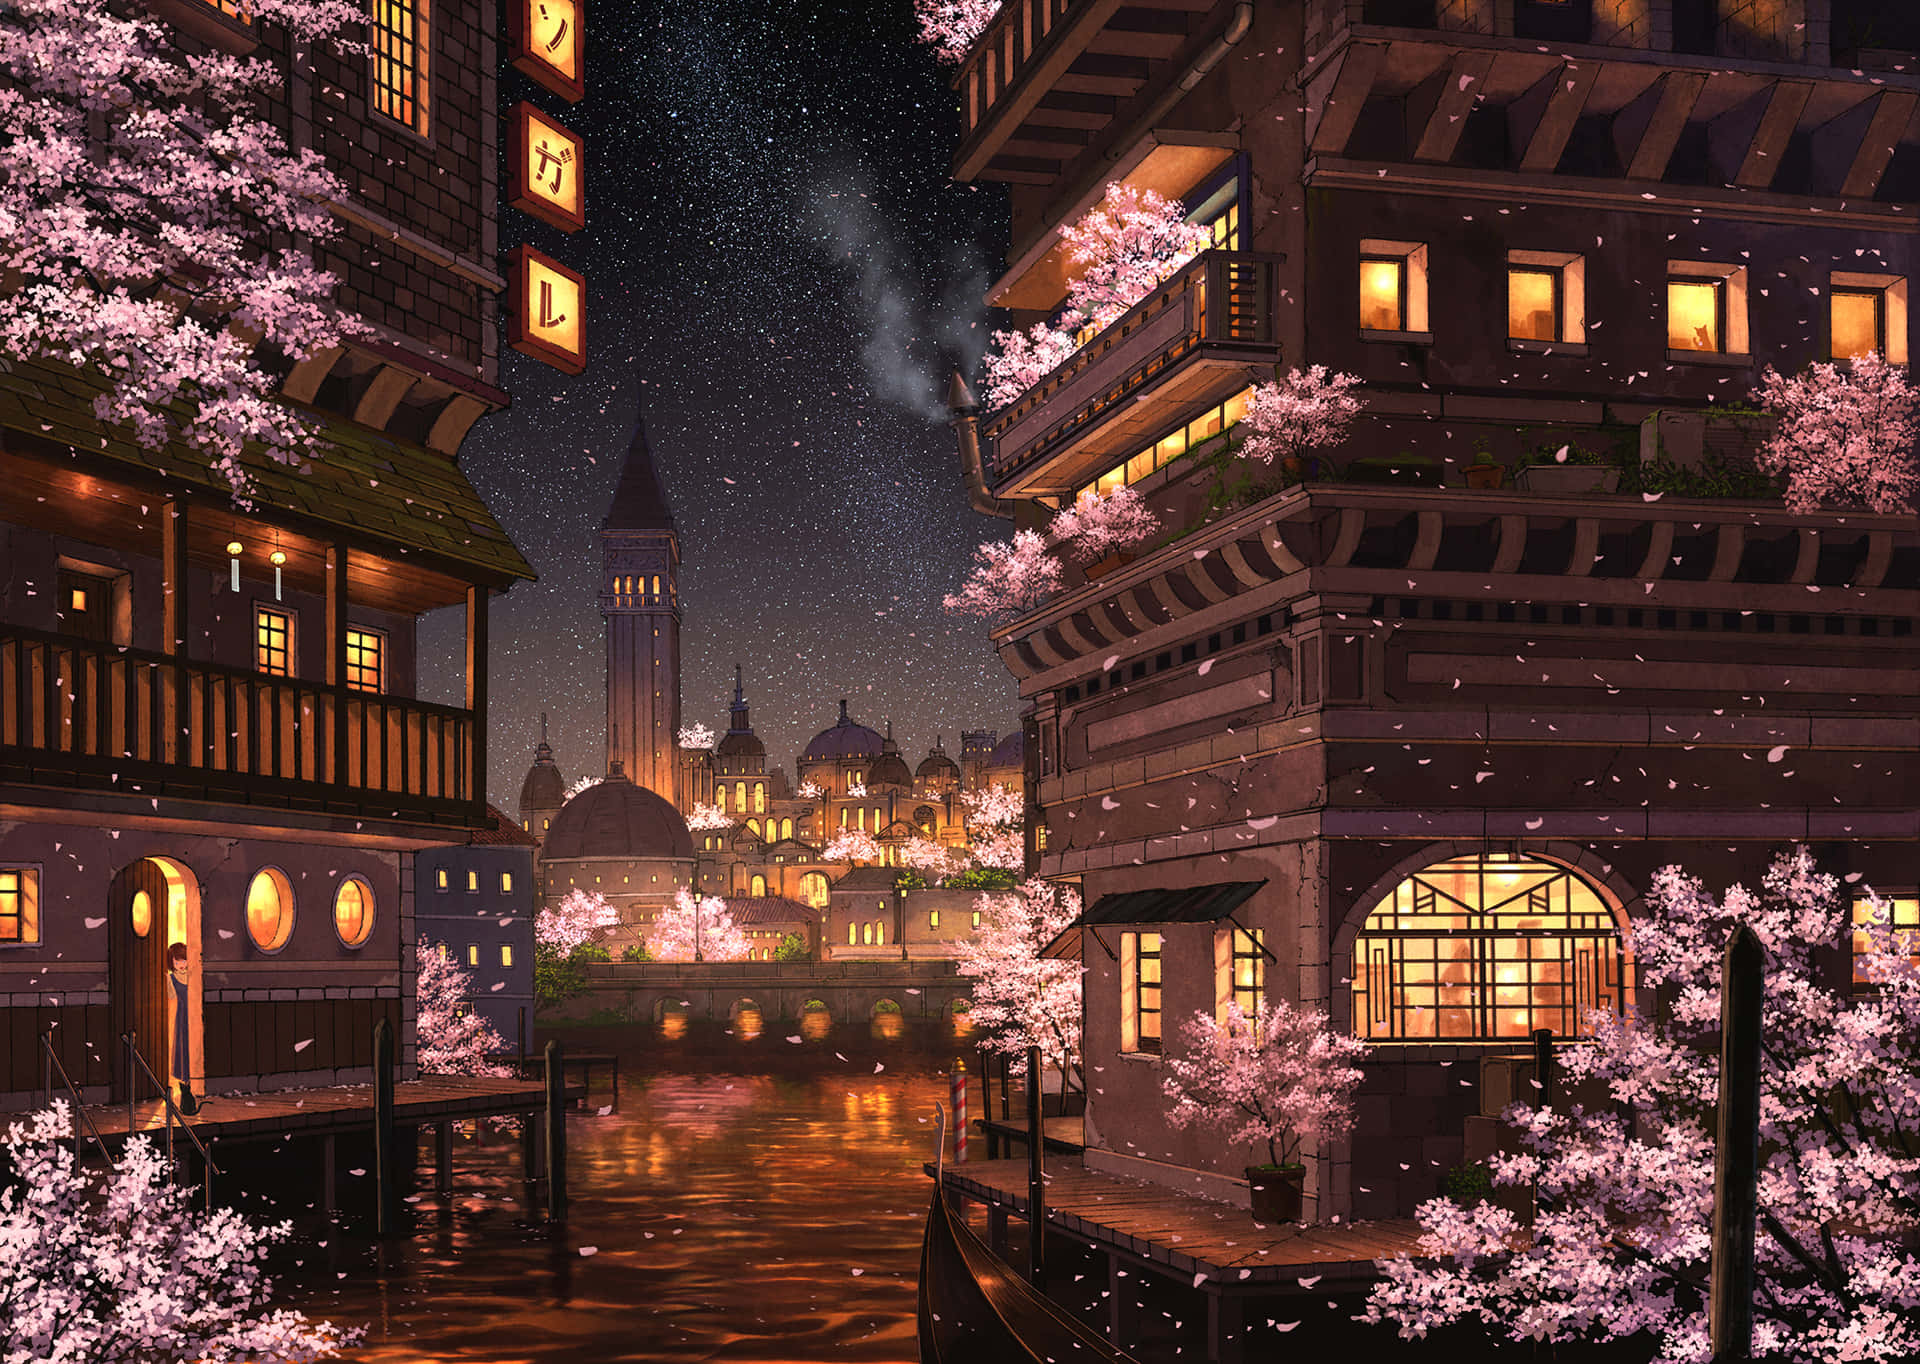 Moonlight's Magical Glow of the Everlasting Cherry Blossom Wallpaper